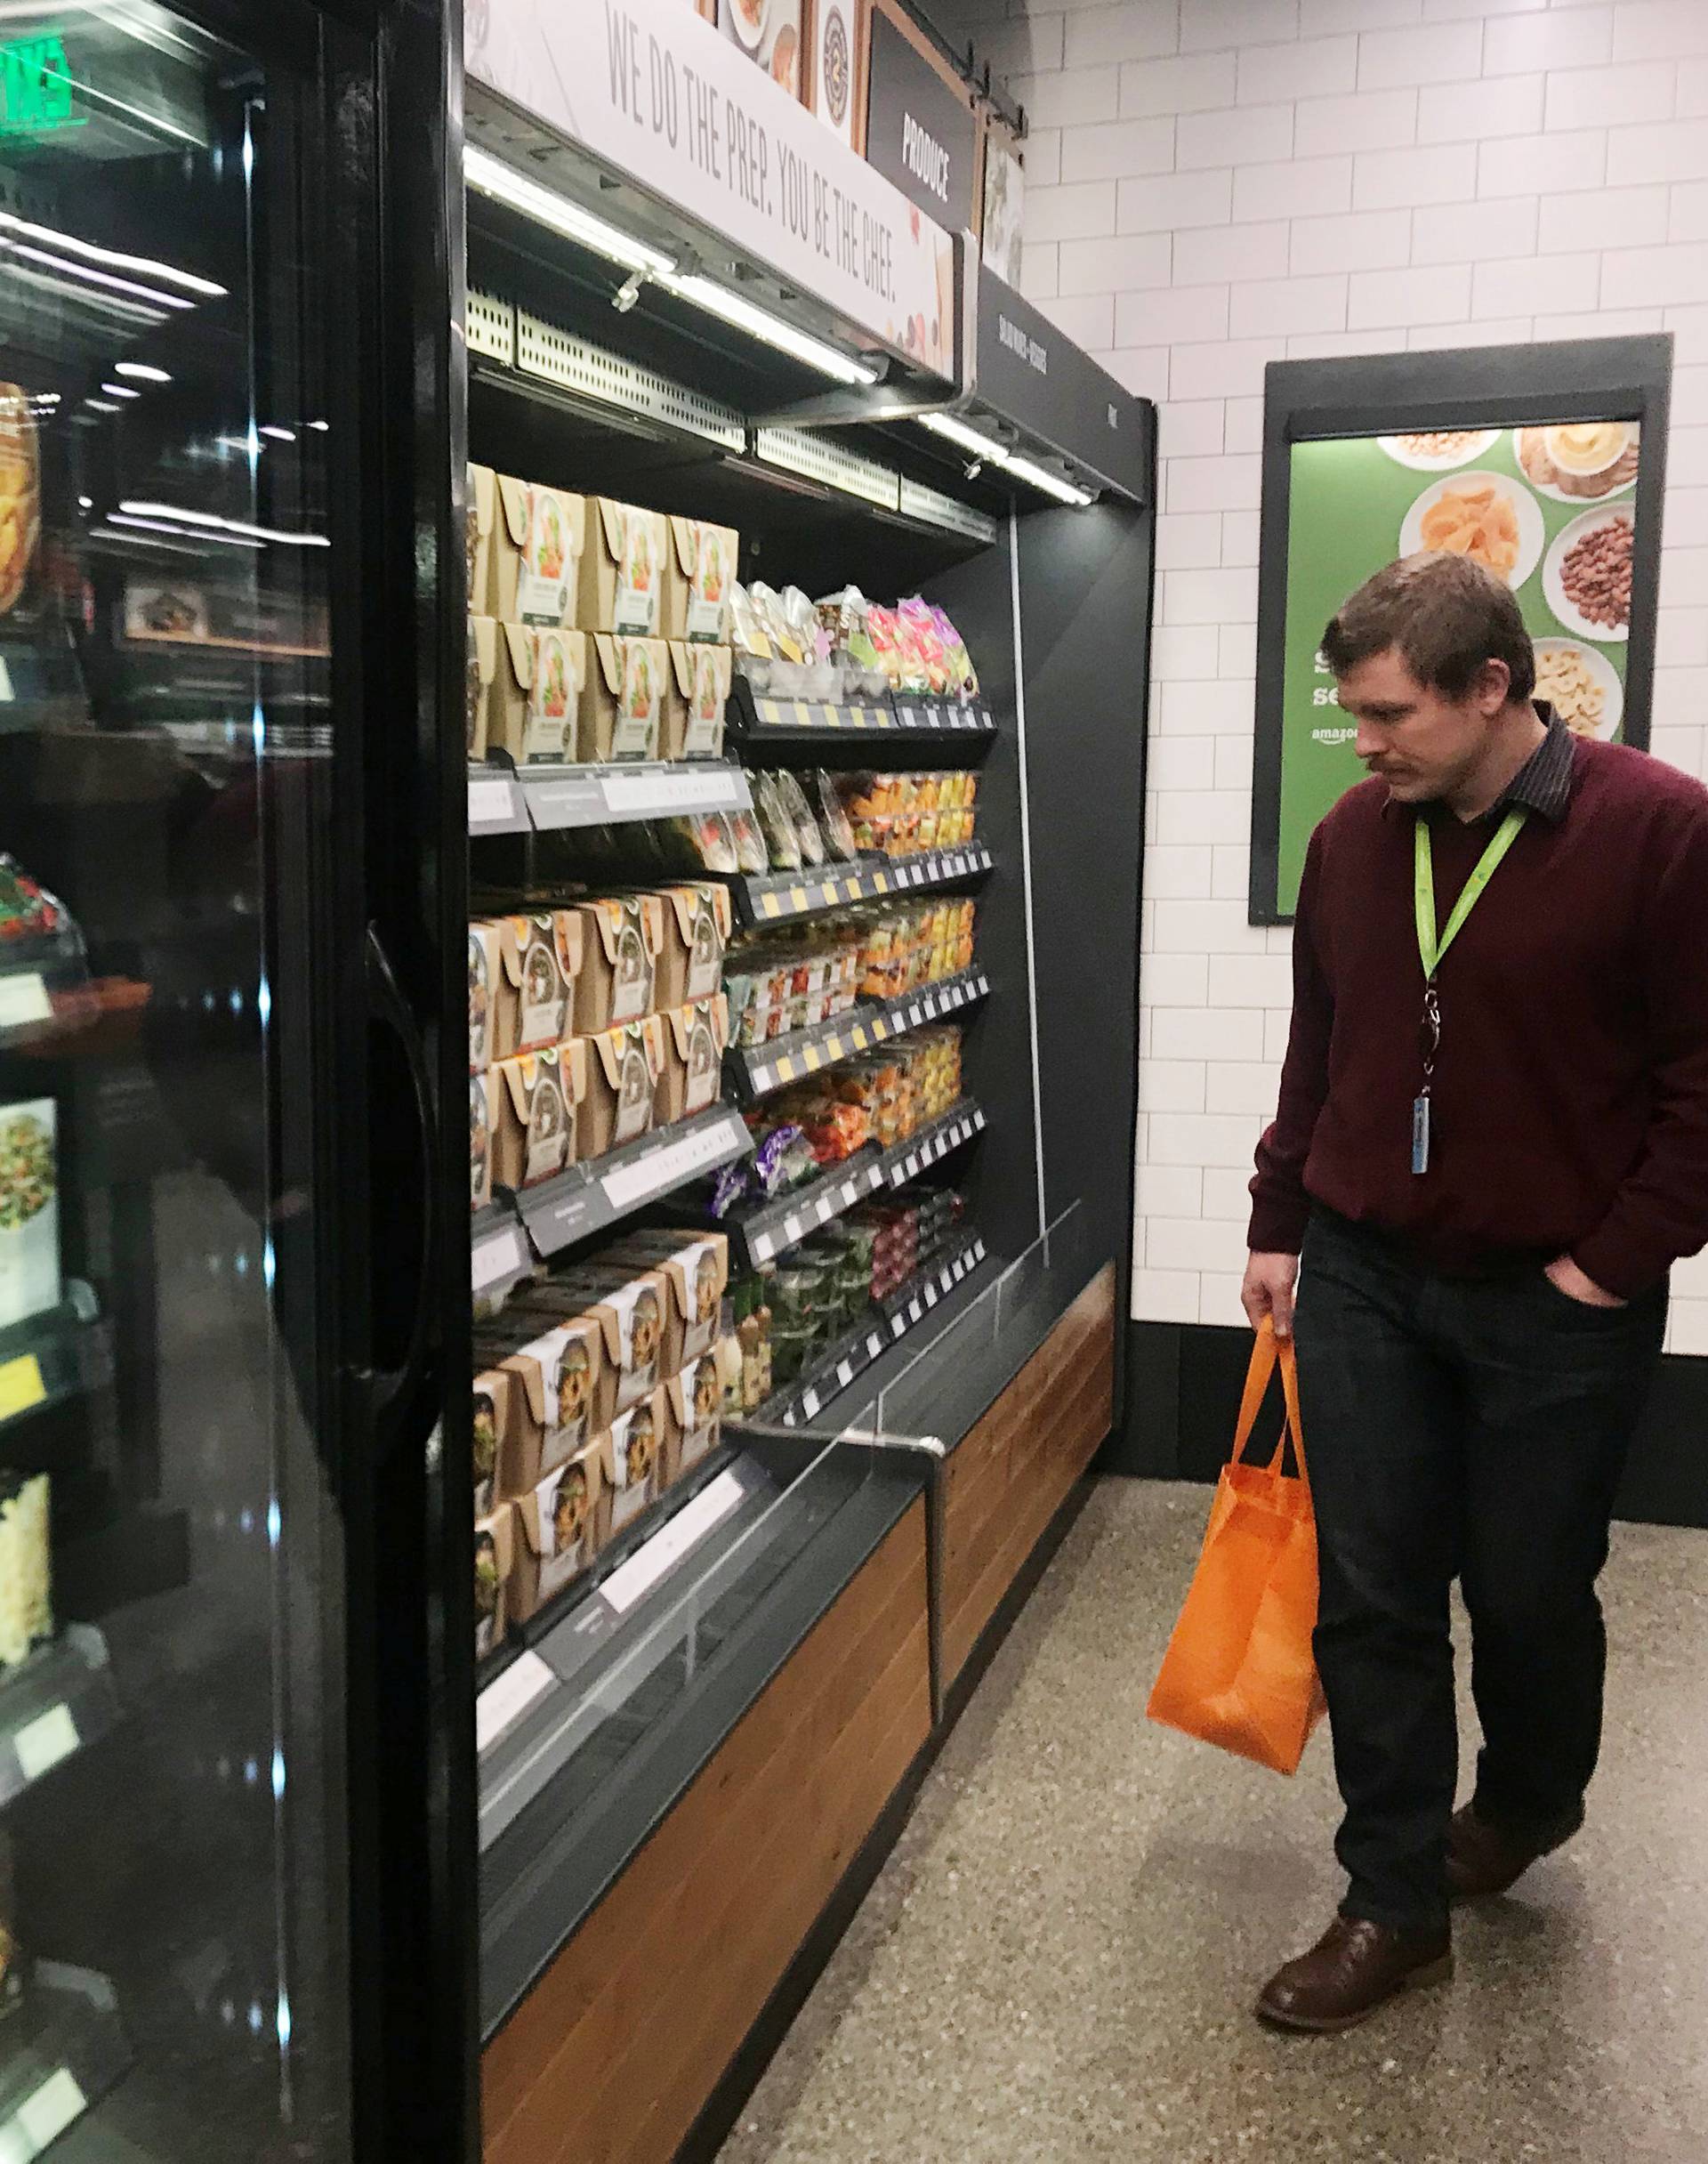 Customer browses meal-kit options at Amazon's new "grab-and-go" store in Seattle